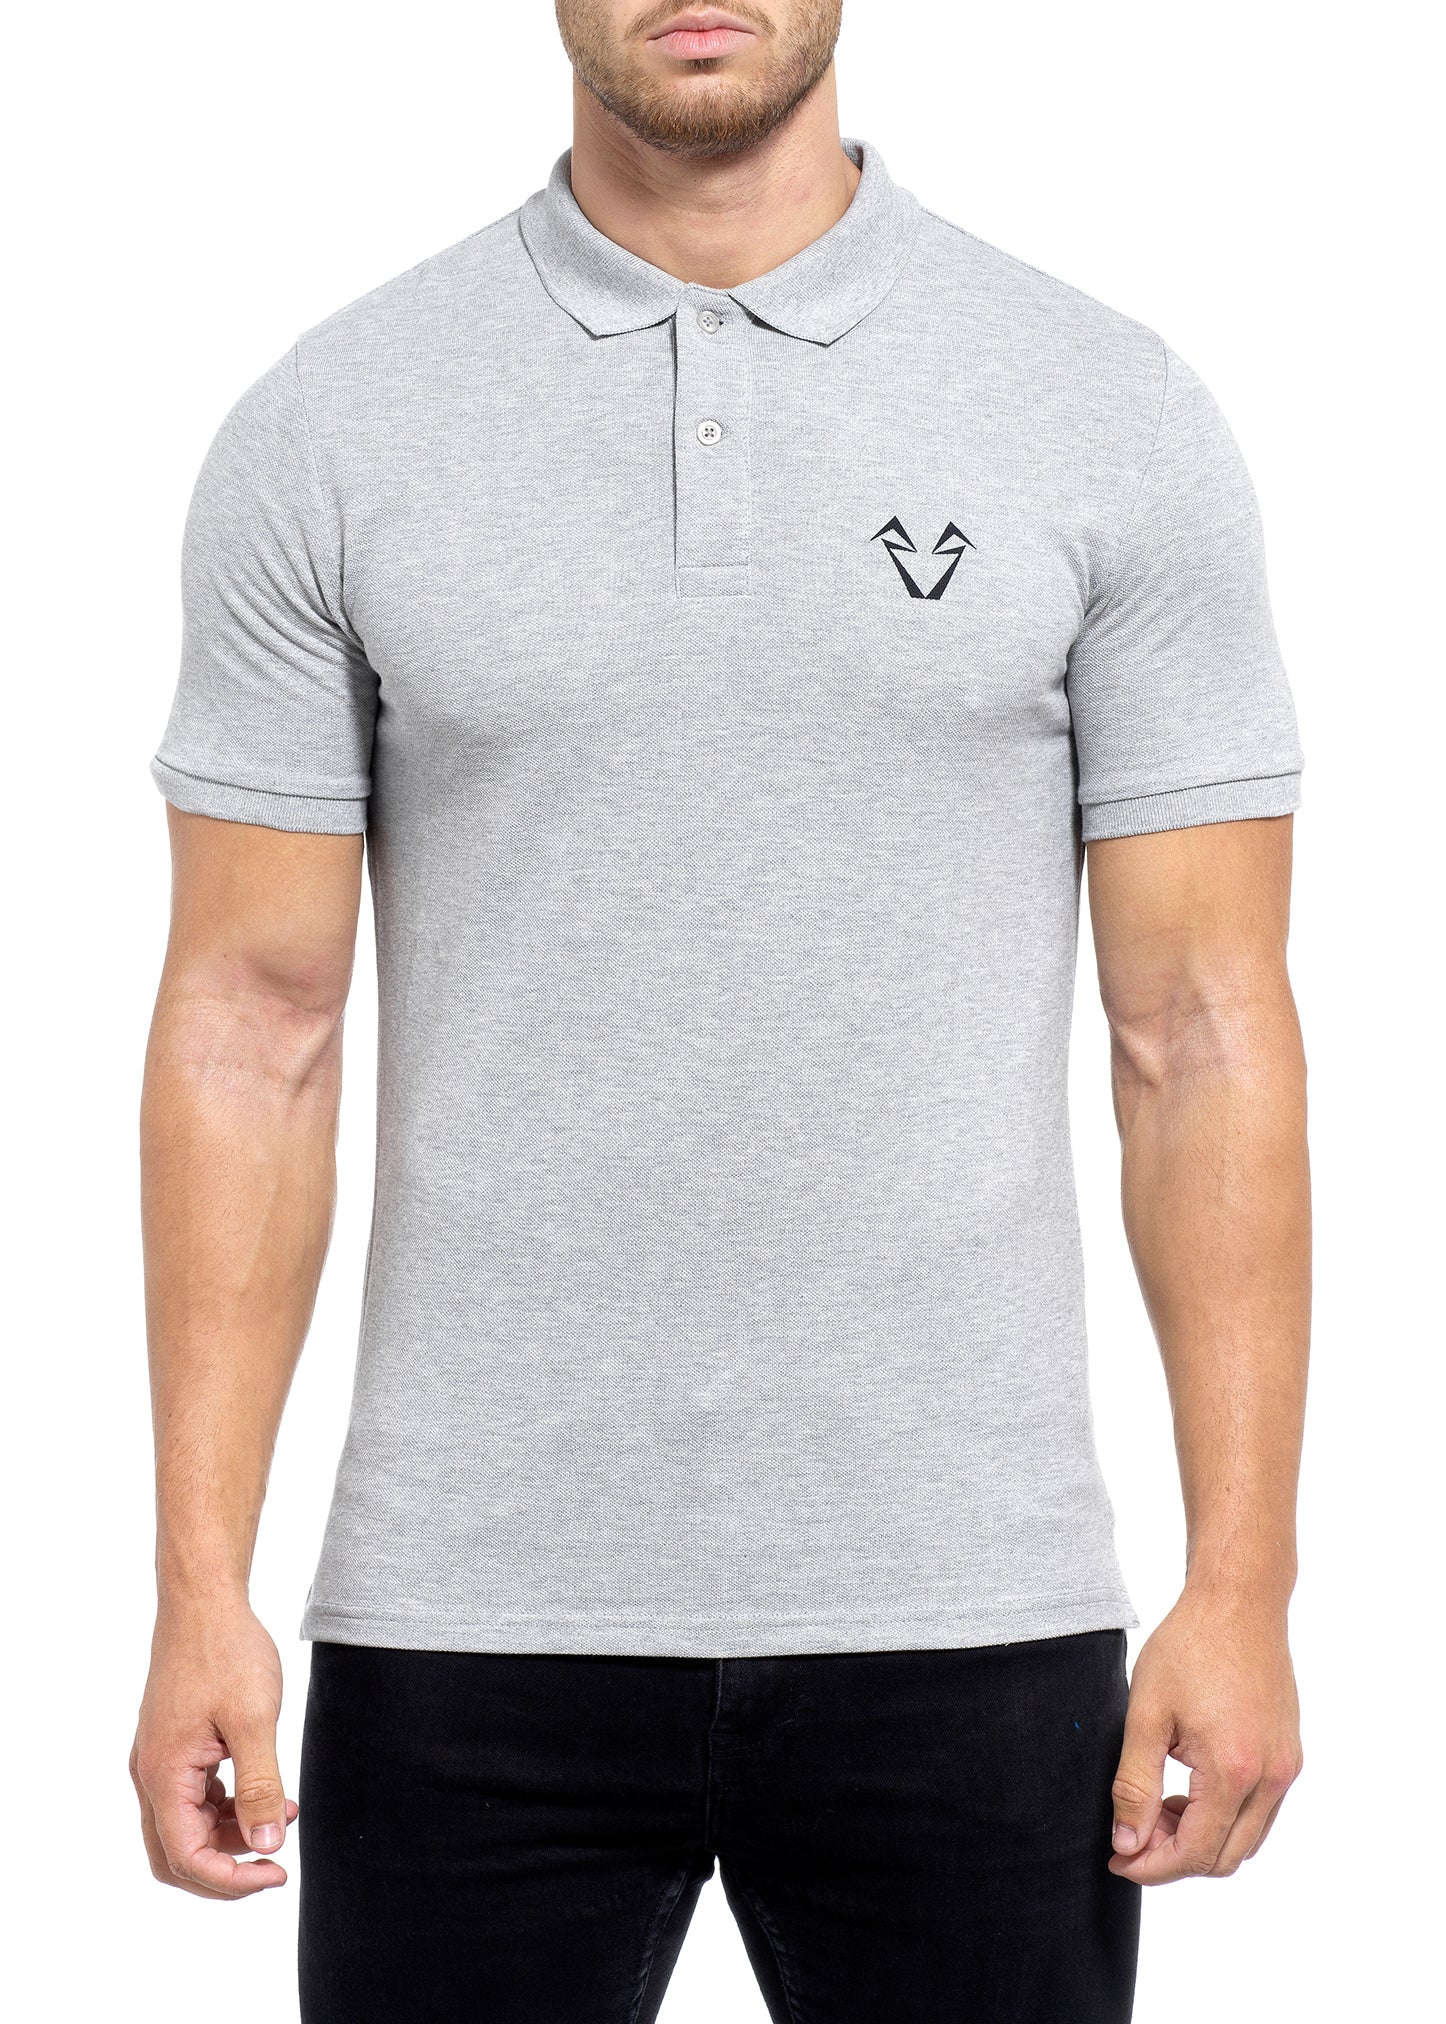 Mens Muscle Fit Heather Grey Polo Shirts